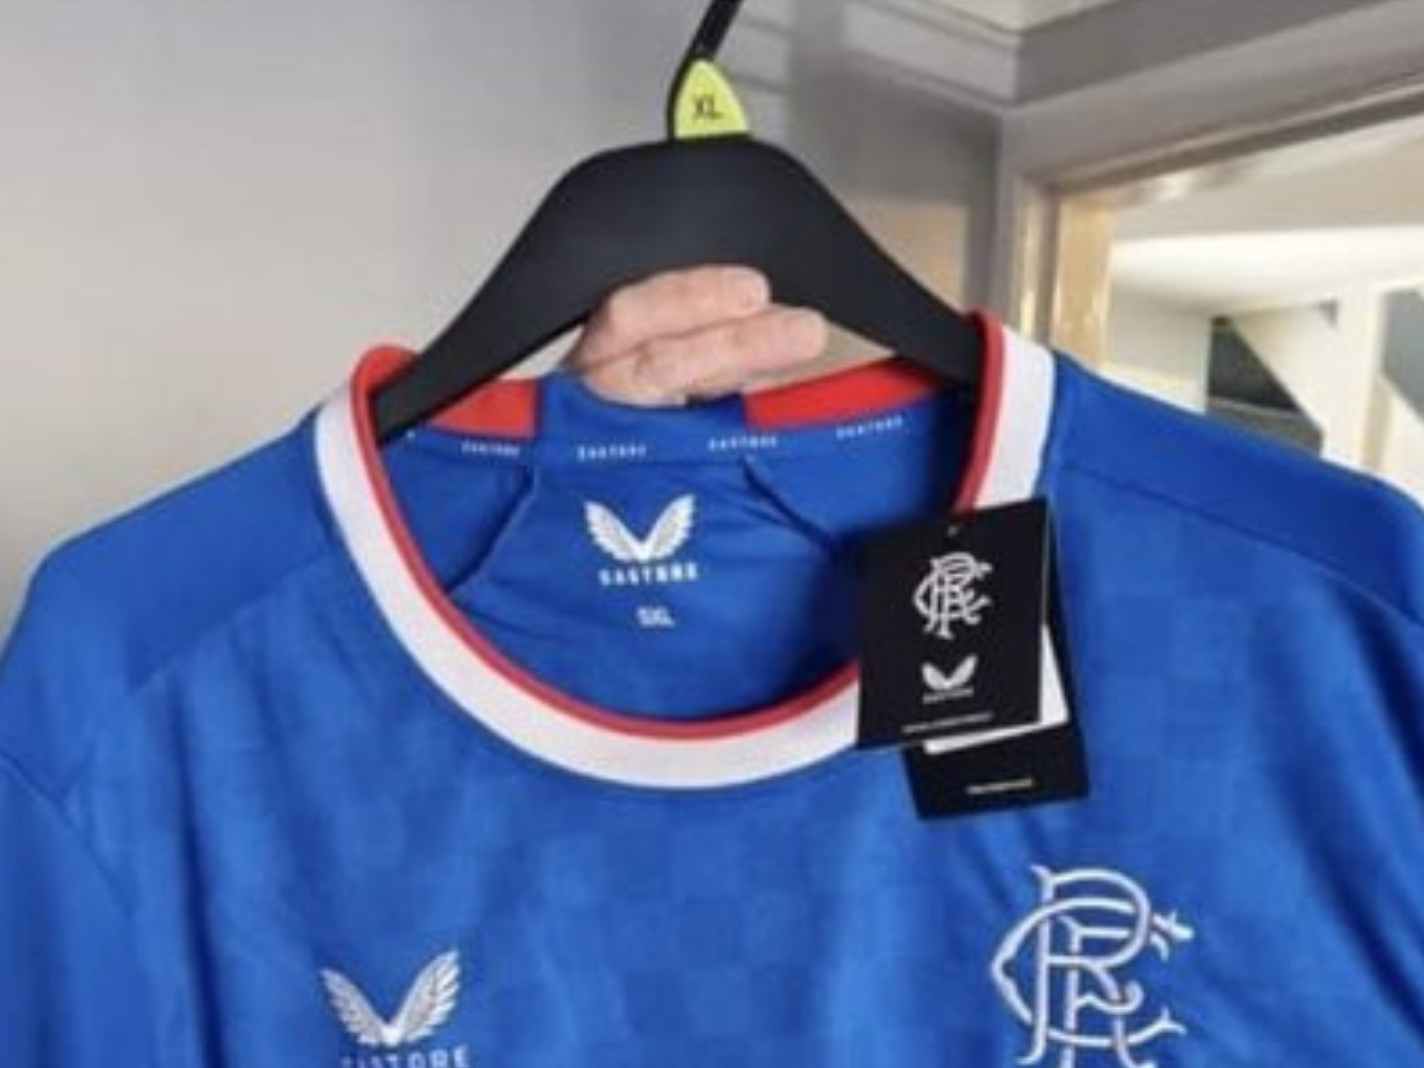 Did Castore send 22/23 Rangers home kit by accident? Here’s what we know